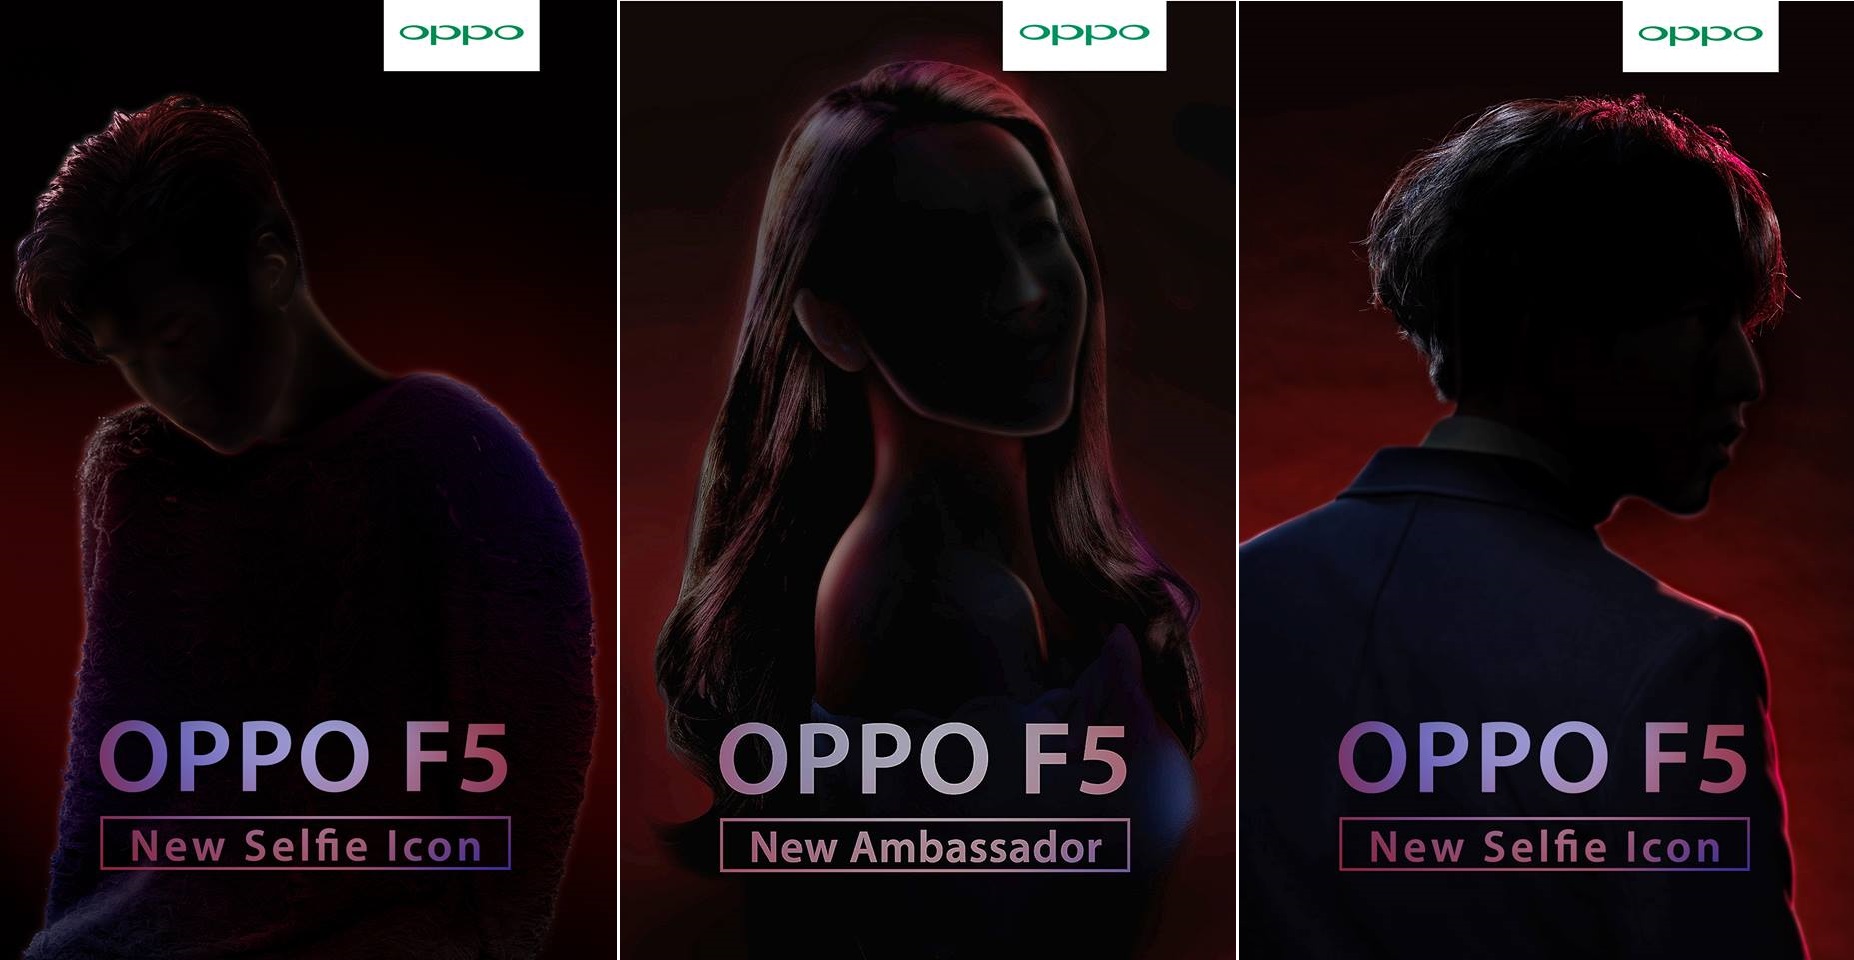 OPPO F5 arriving on 2 November 2017 with three new celebrities